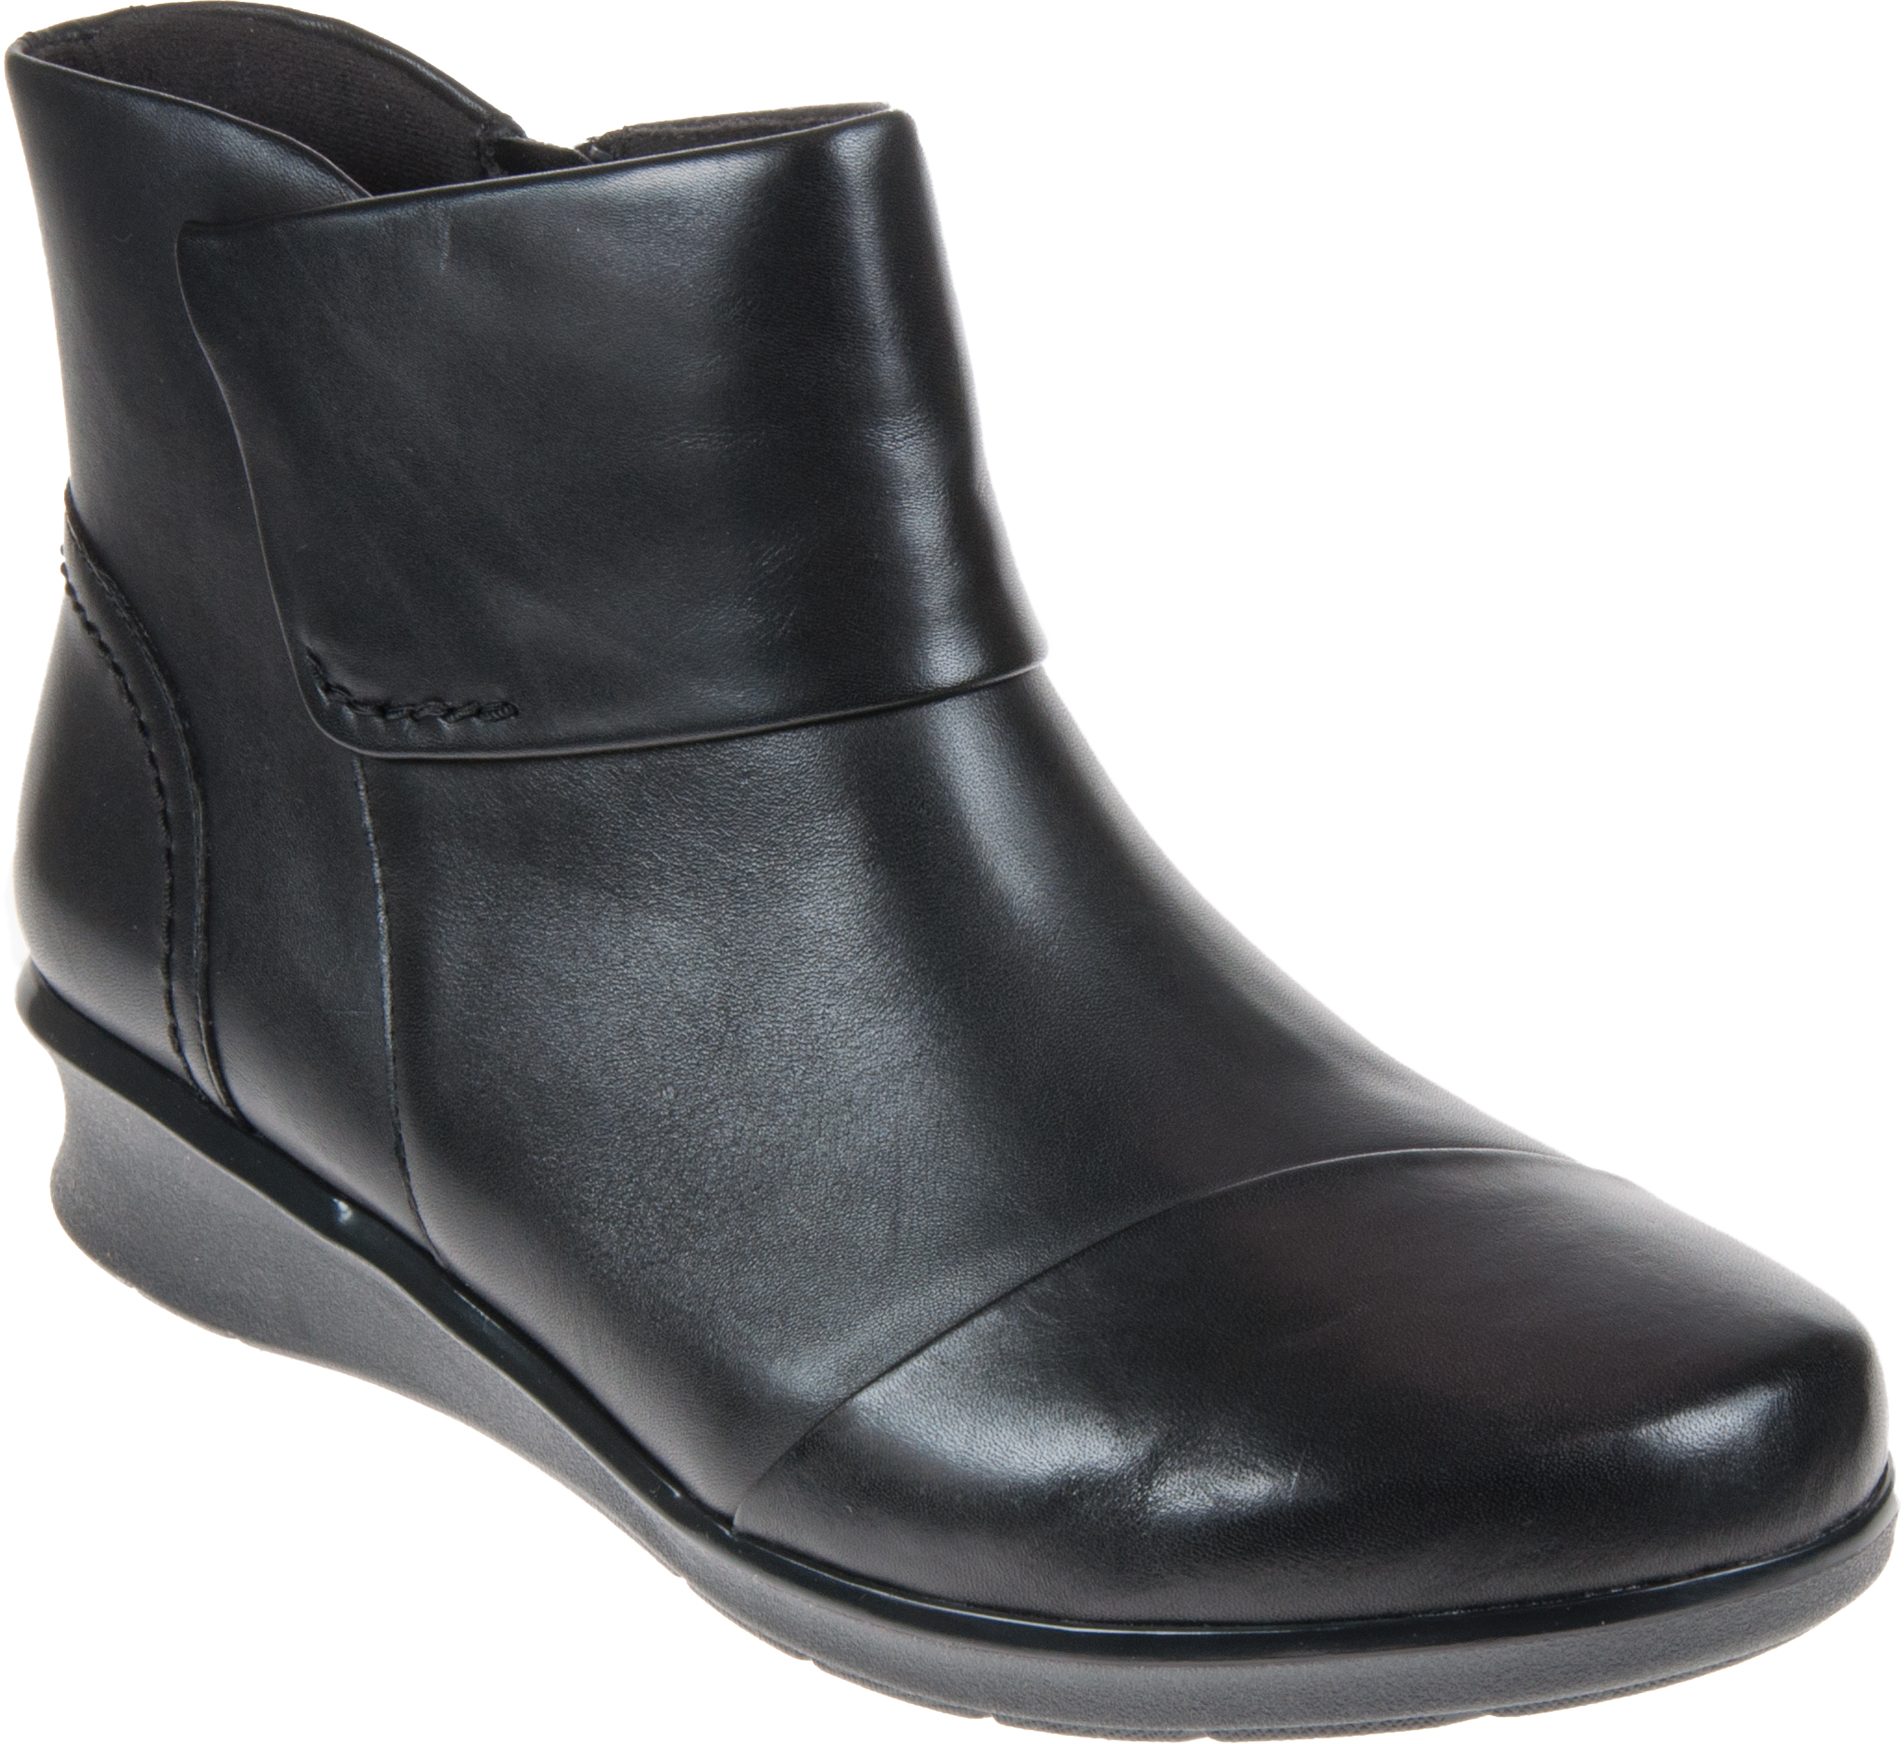 Clarks Hope Track Black Leather 26137875 - Ankle Boots - Humphries Shoes